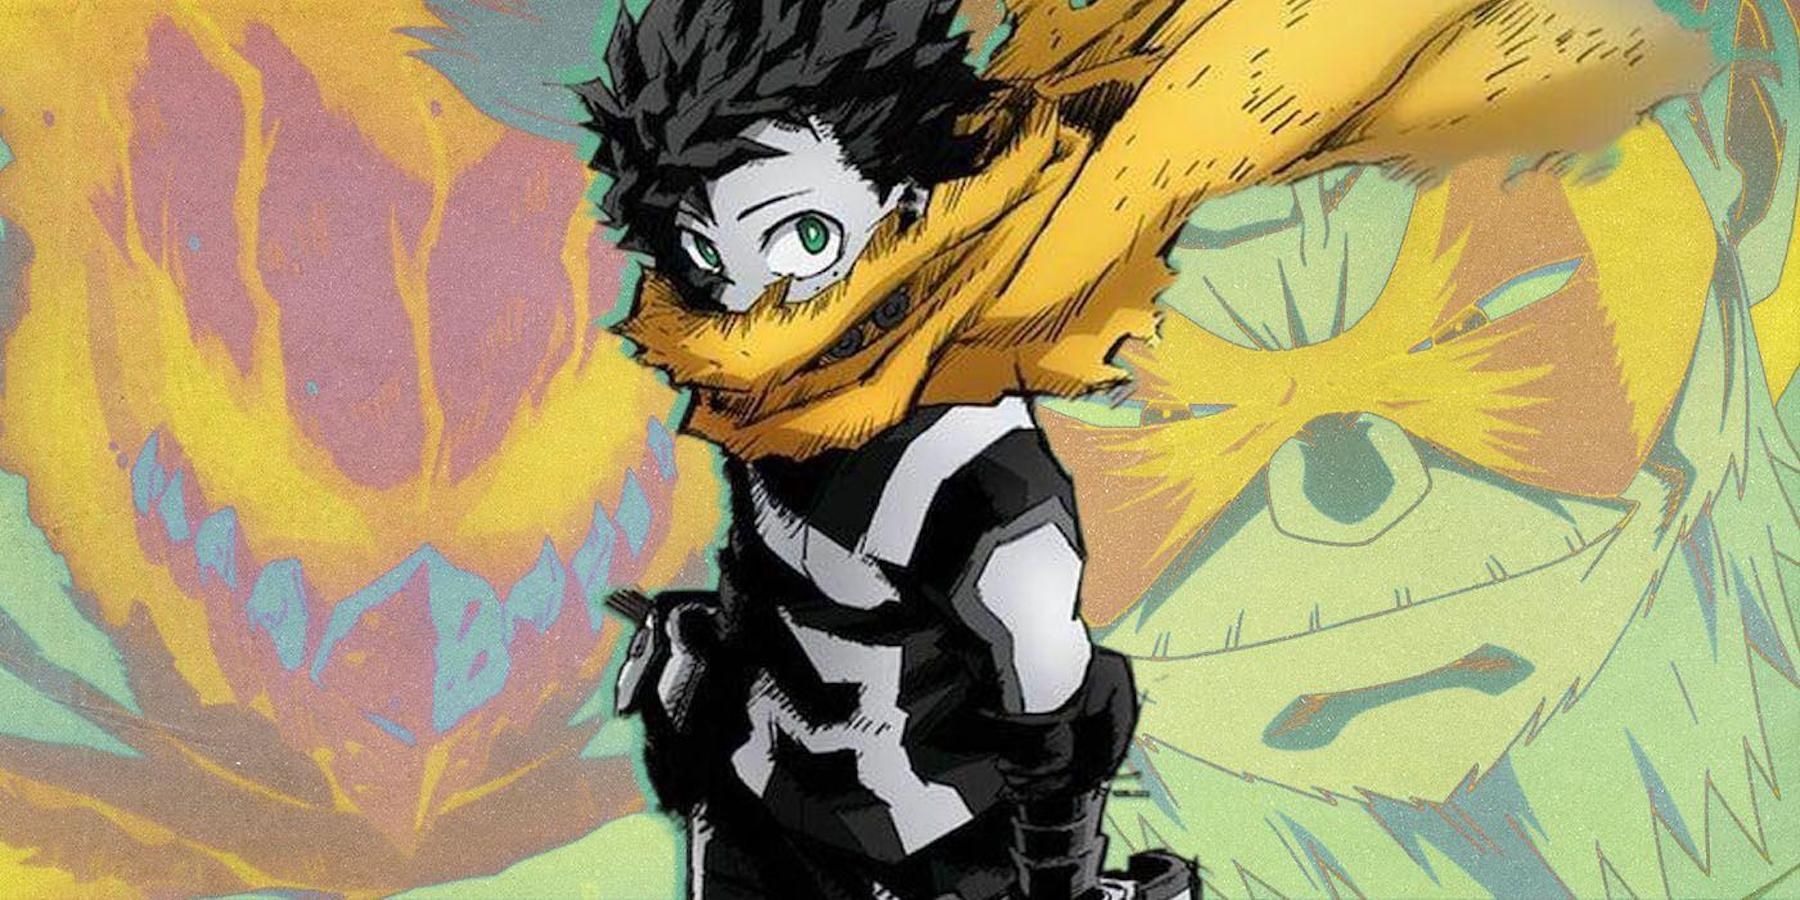 My Hero Academia season 7: Expected release date, what to expect